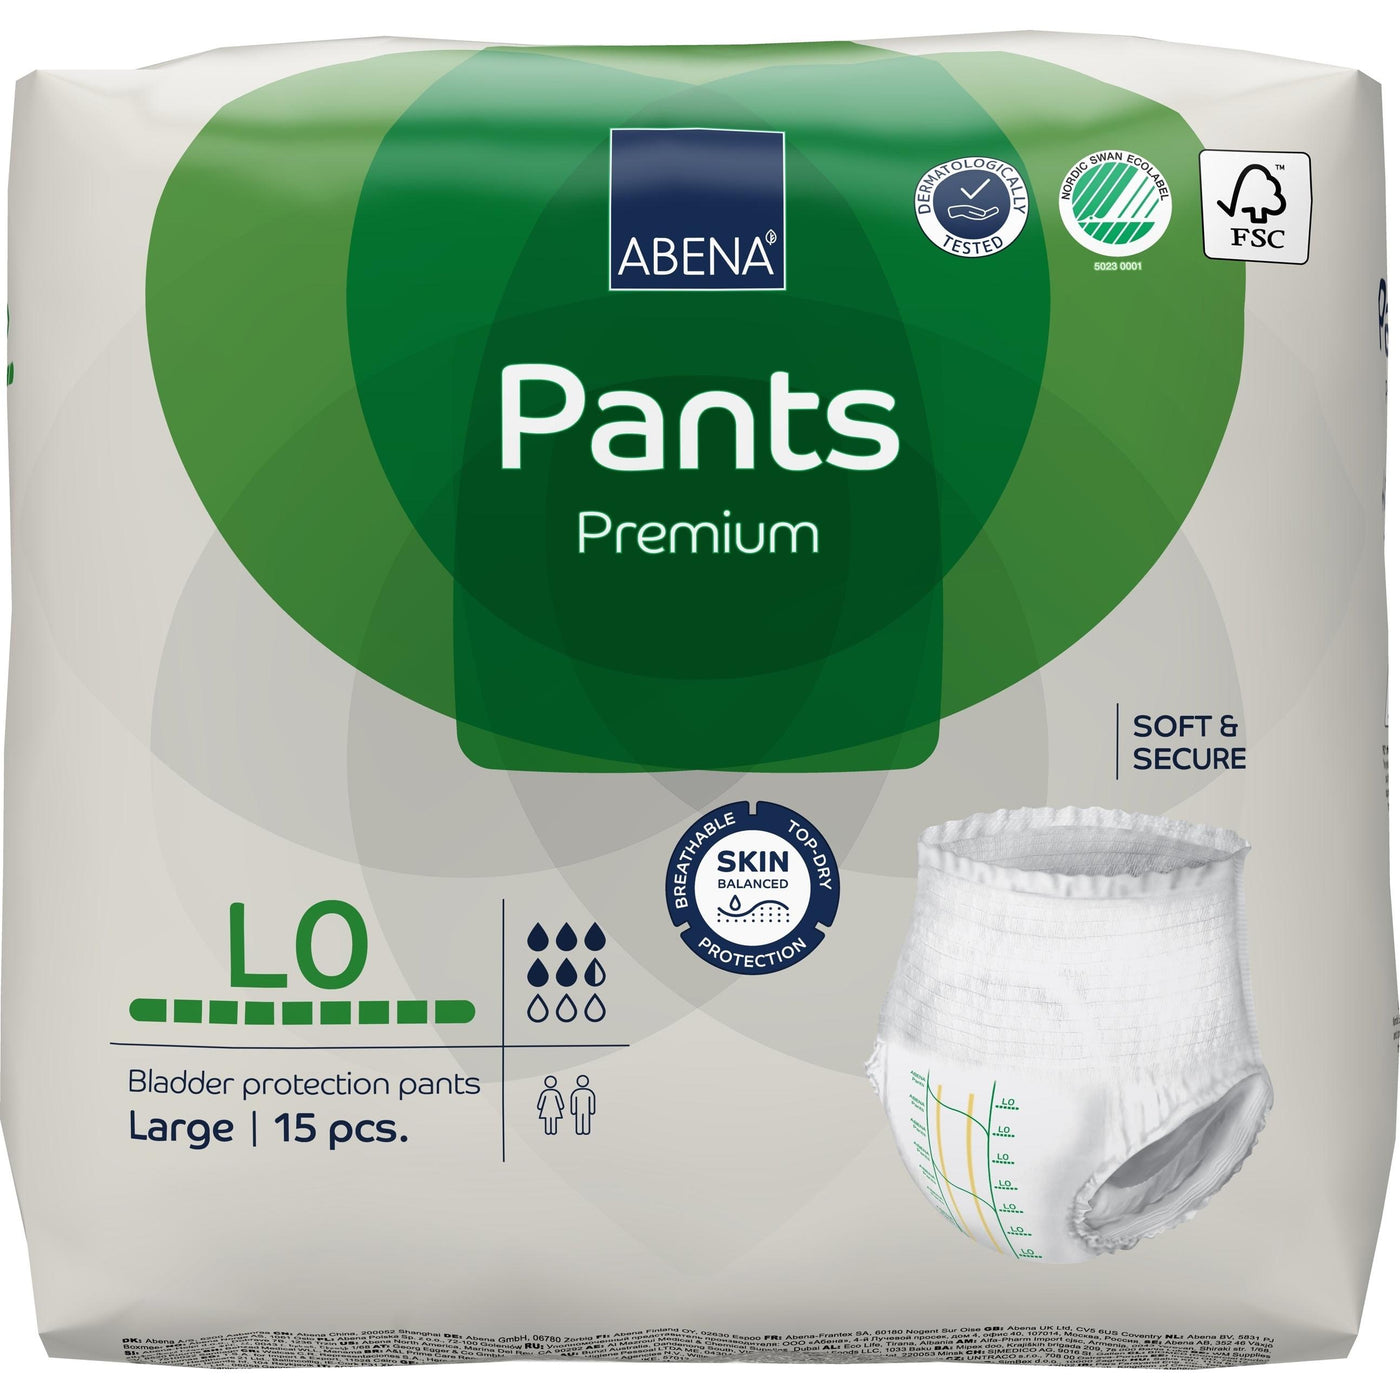 Tena Proskin Plus Extra Small Incontinence Briefs, Moderate Absorbency,  Unisex, X-small, 30 Count : Target